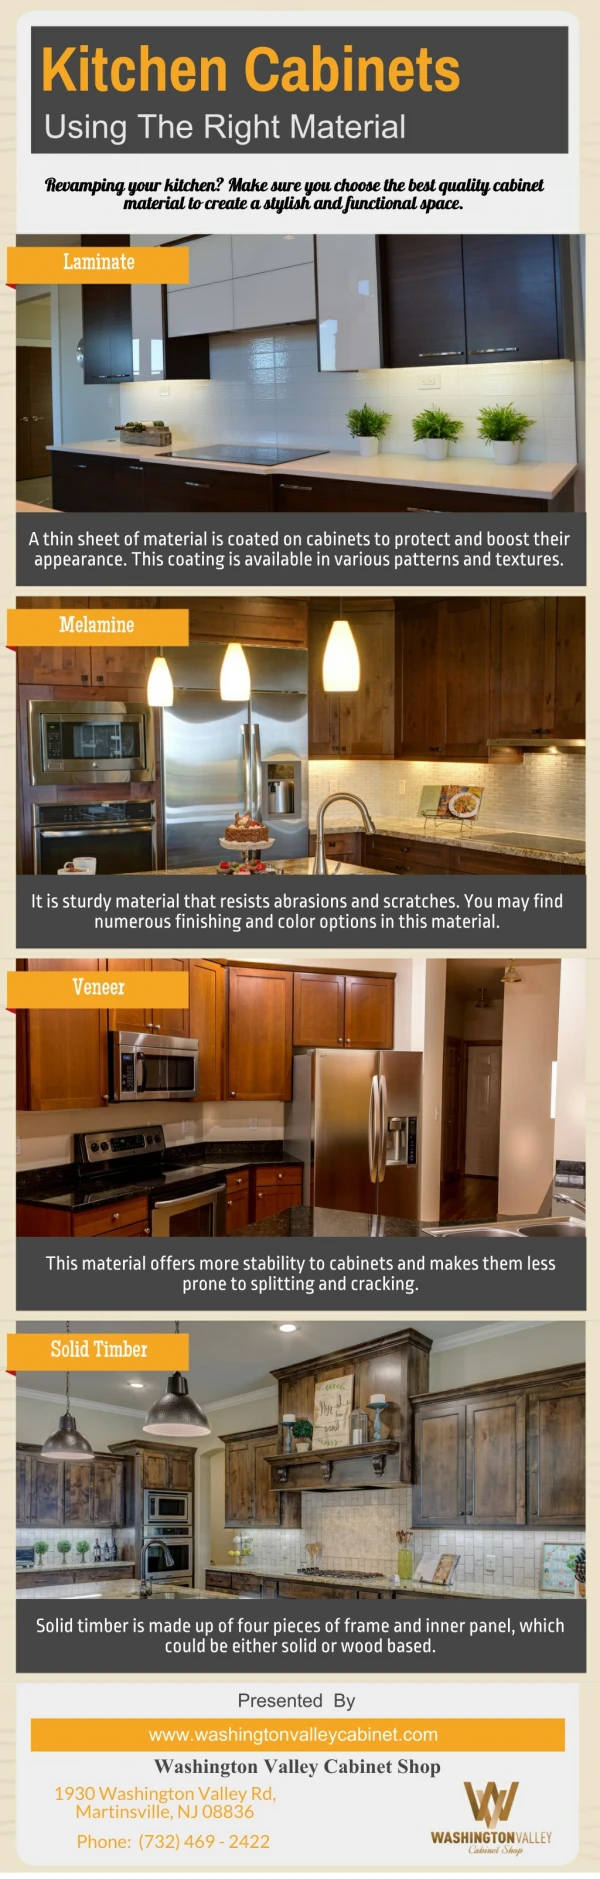 Kitchen Cabinets Using The Right Material